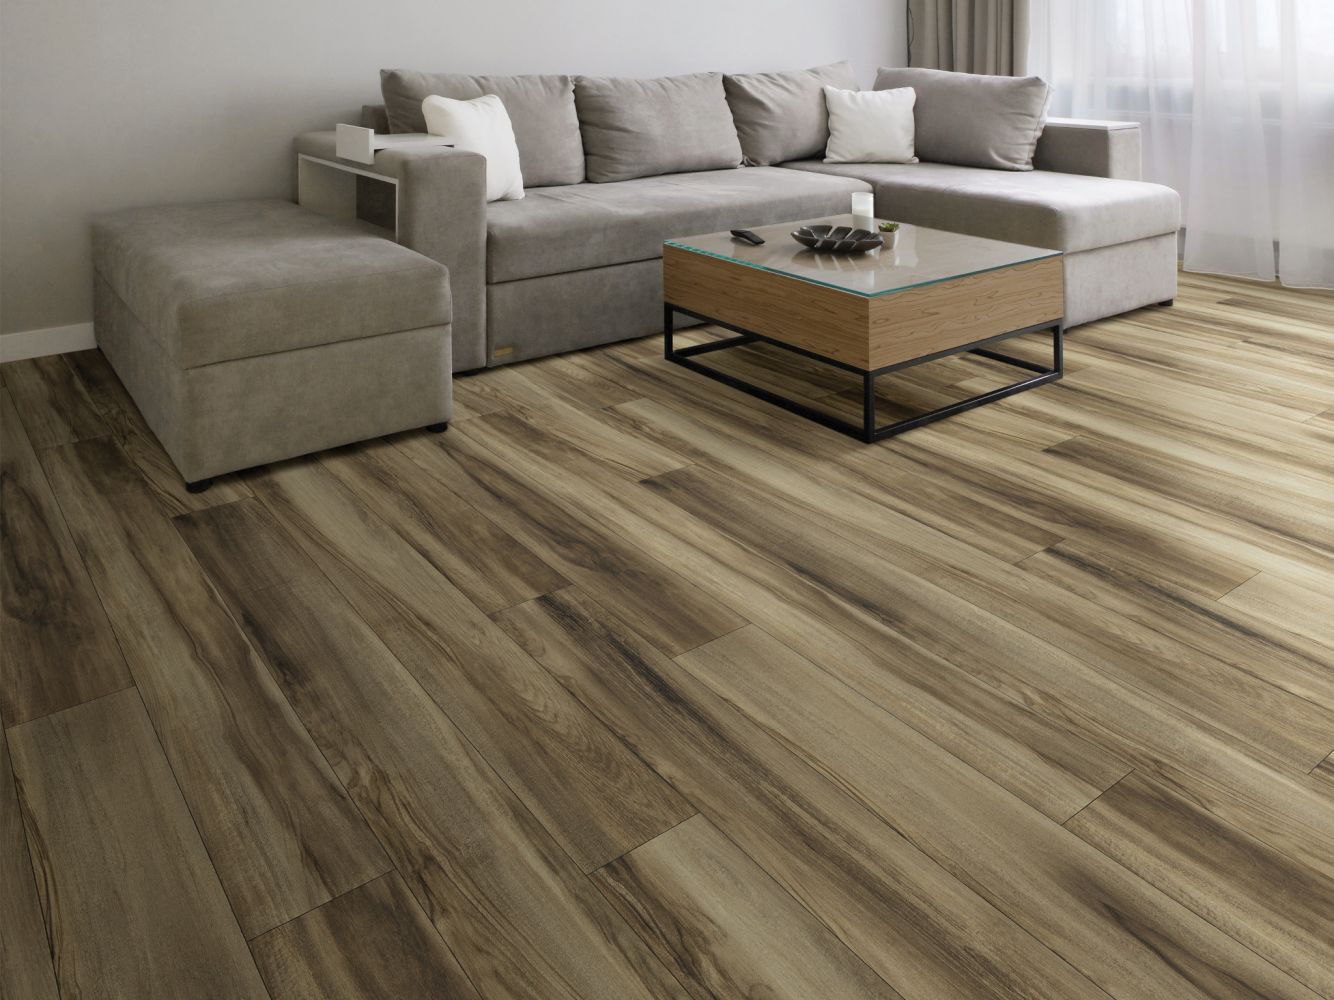 Shaw Floors Resilient Residential Urban Woodlands 65g Pennypack 00248_VG088